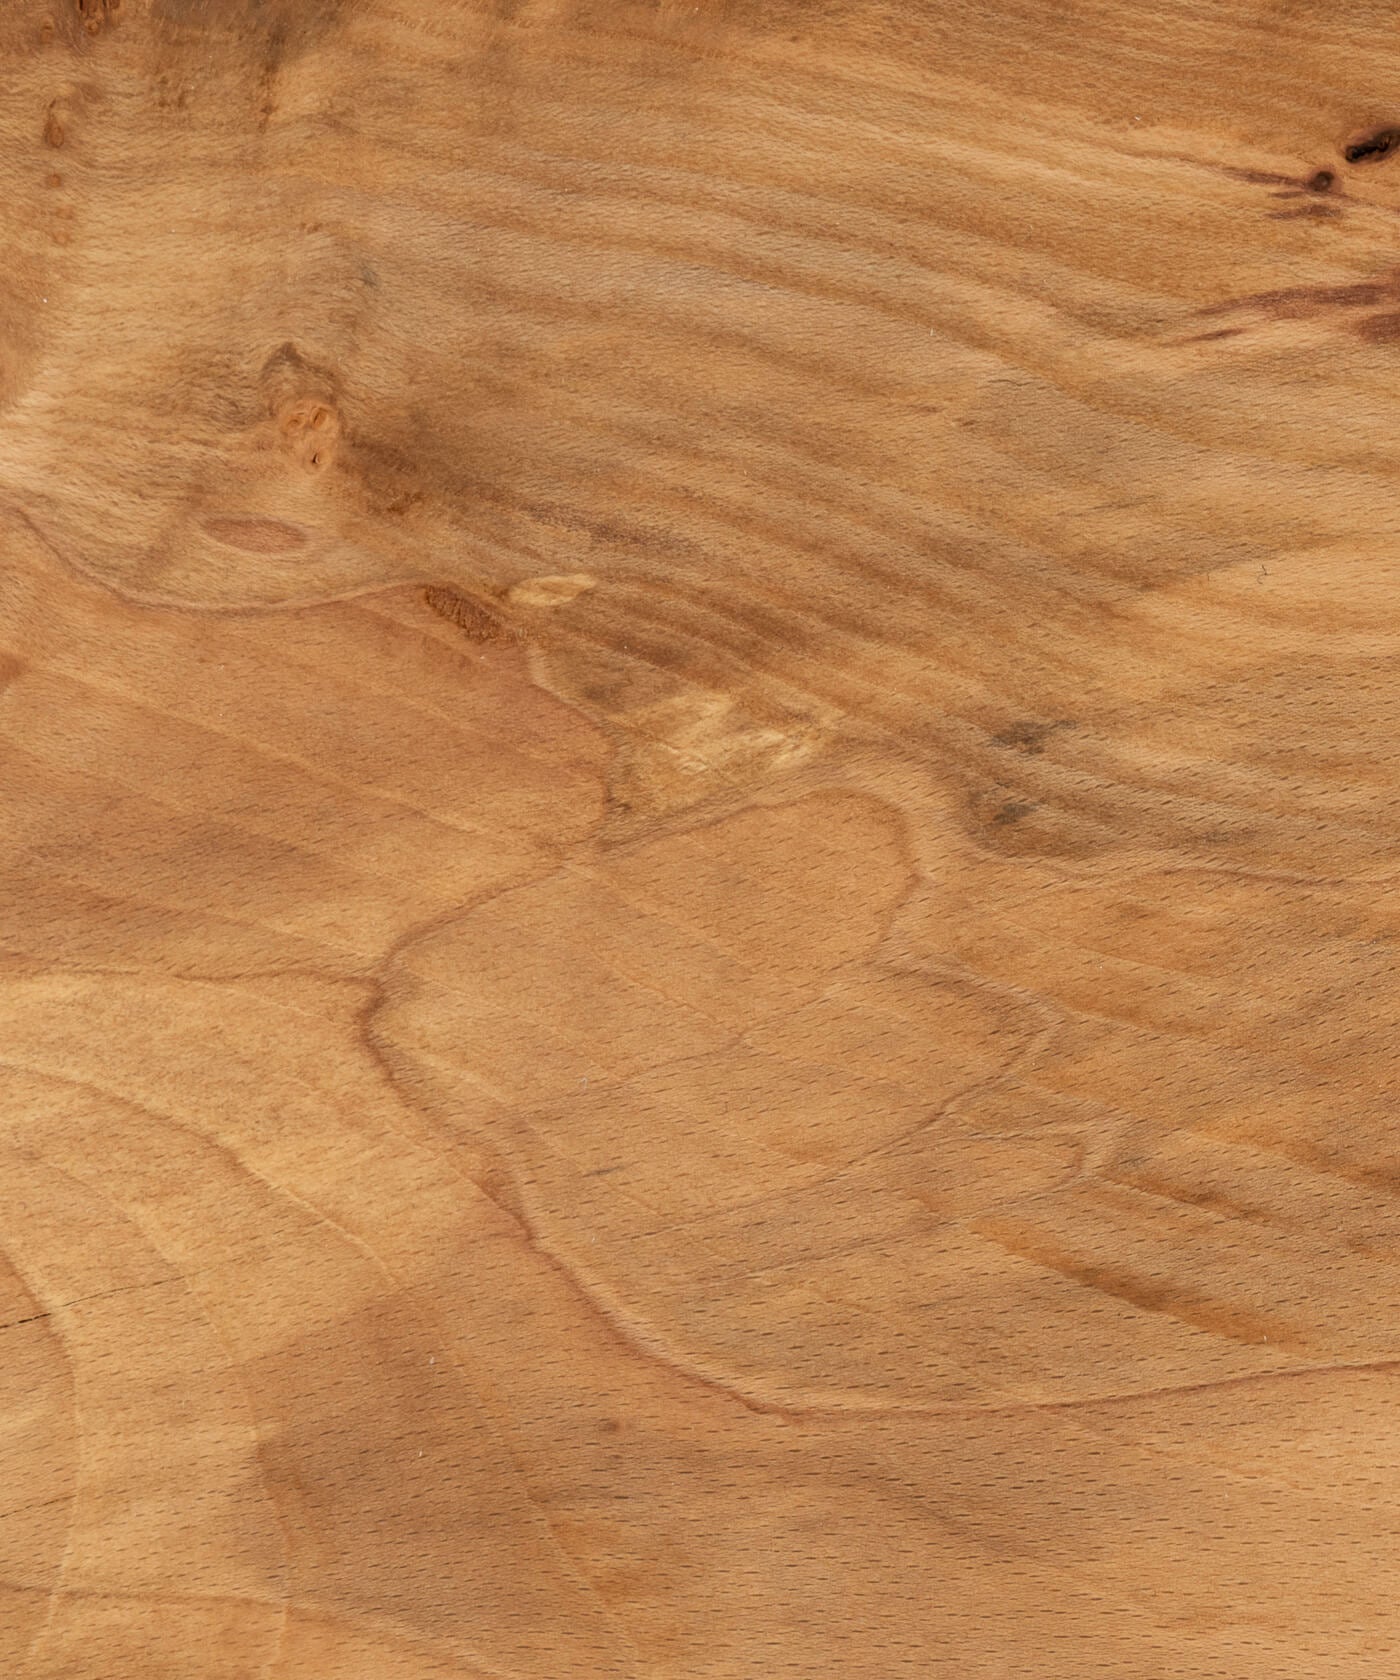 Oiled flamed beech timber grain close up